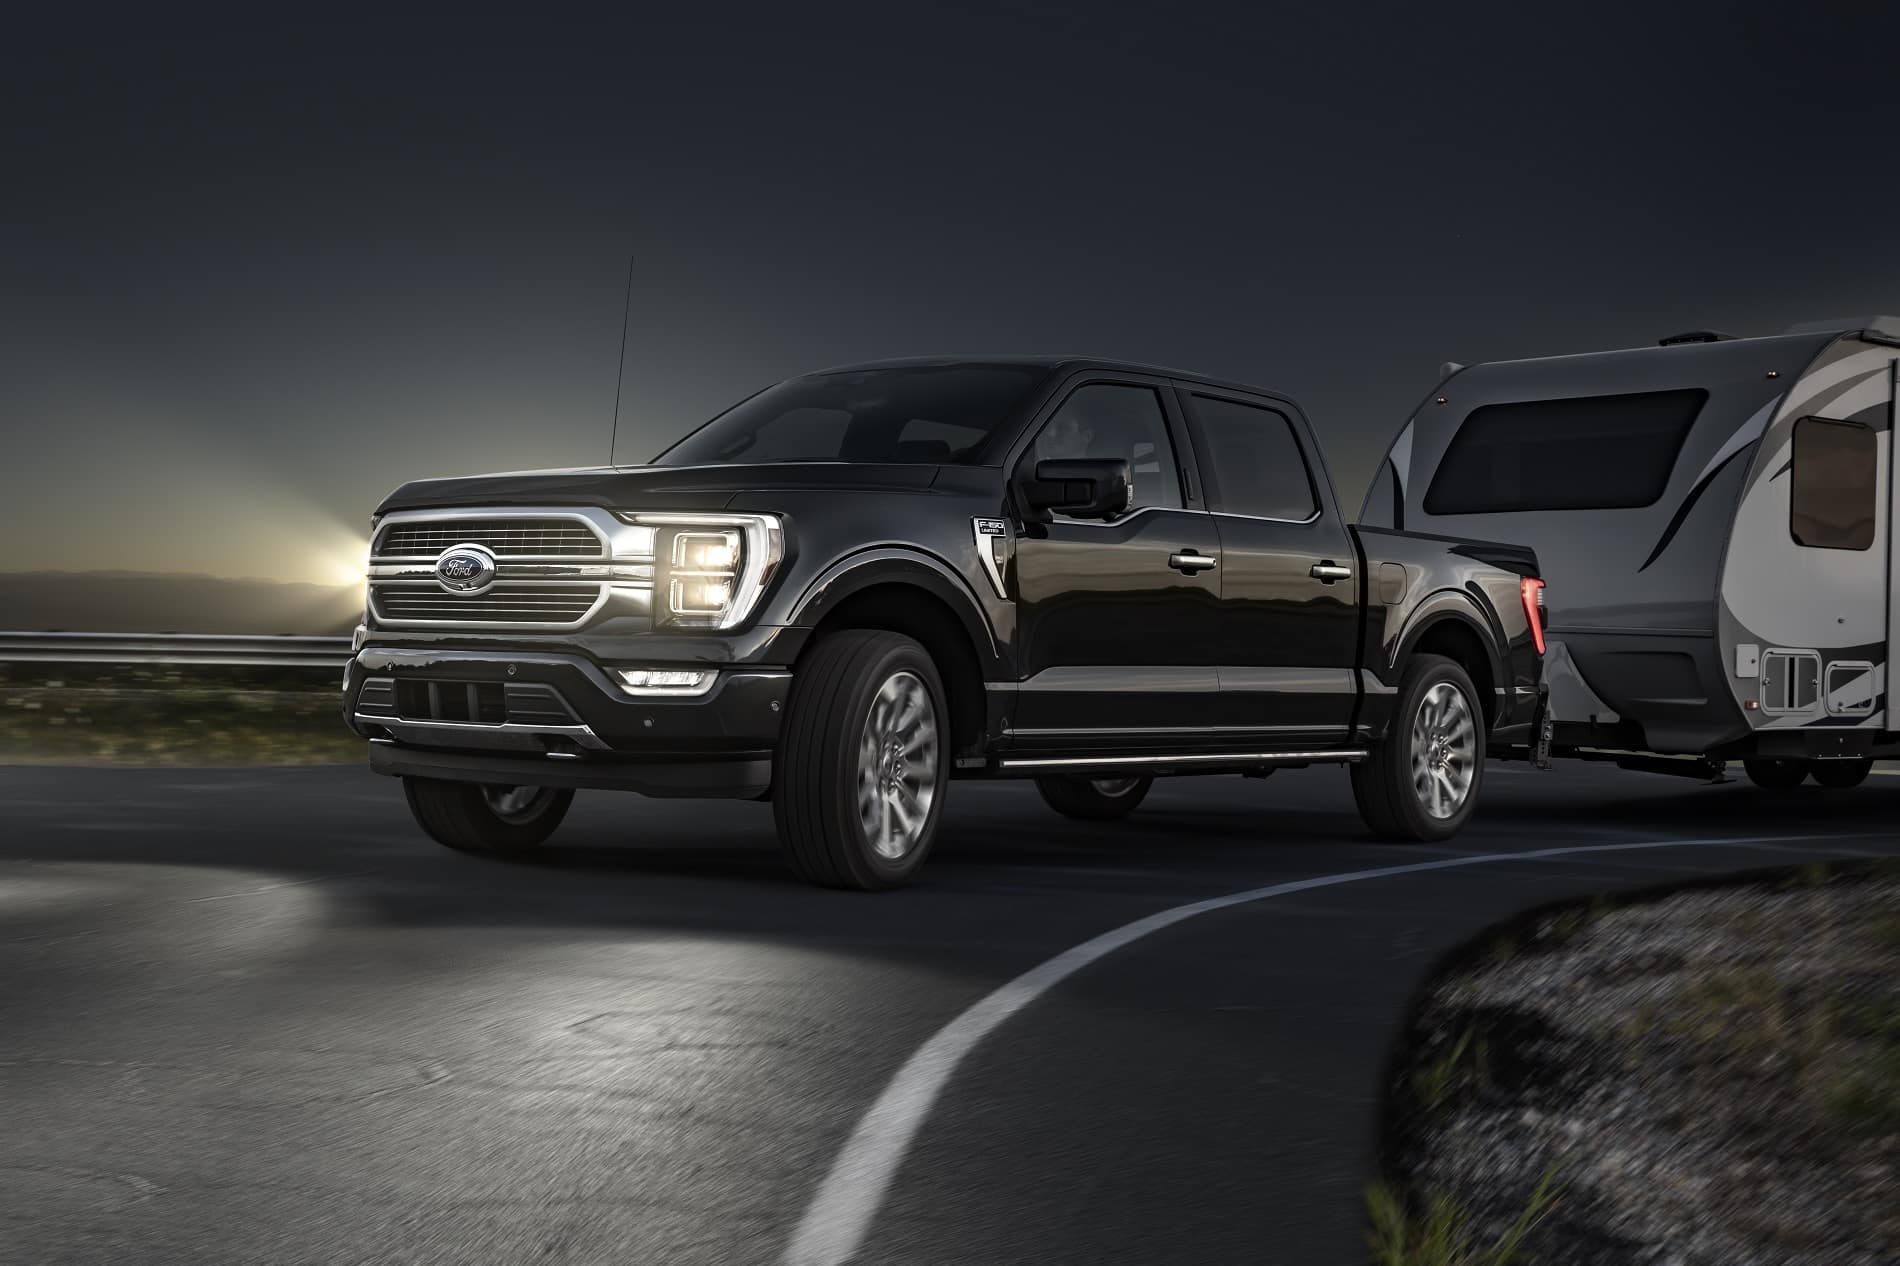 2021 Ford F-150 Towing Power